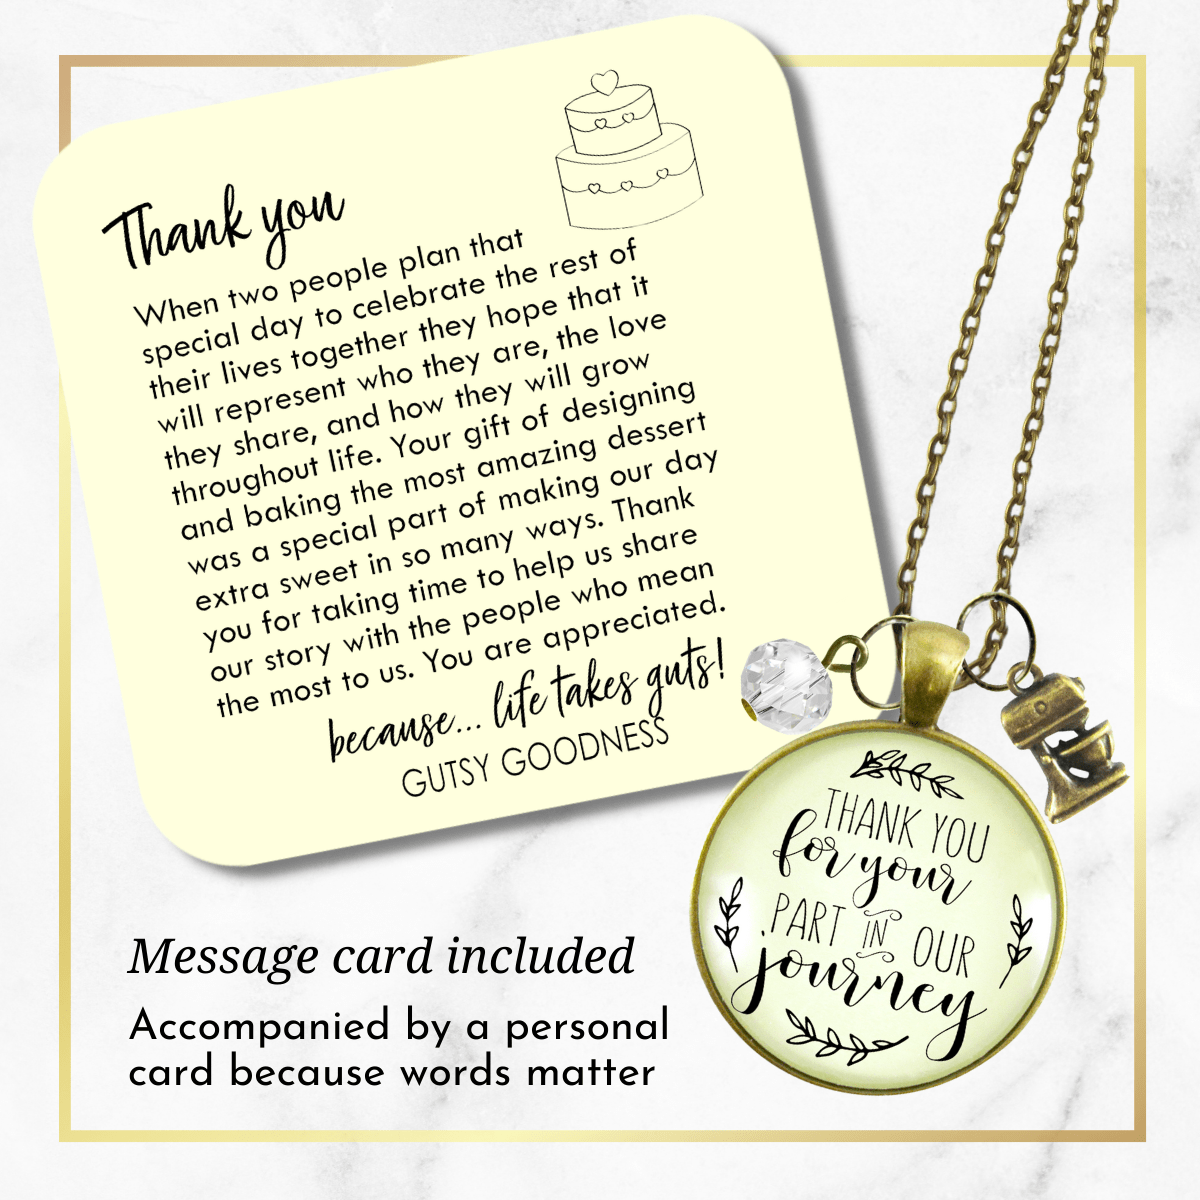 Gutsy Goodness Wedding Cake Baker Gift Necklace Thank You for Your Part Mixer Charm - Gutsy Goodness Handmade Jewelry;Wedding Cake Baker Gift Necklace Thank You For Your Part Mixer Charm - Gutsy Goodness Handmade Jewelry Gifts